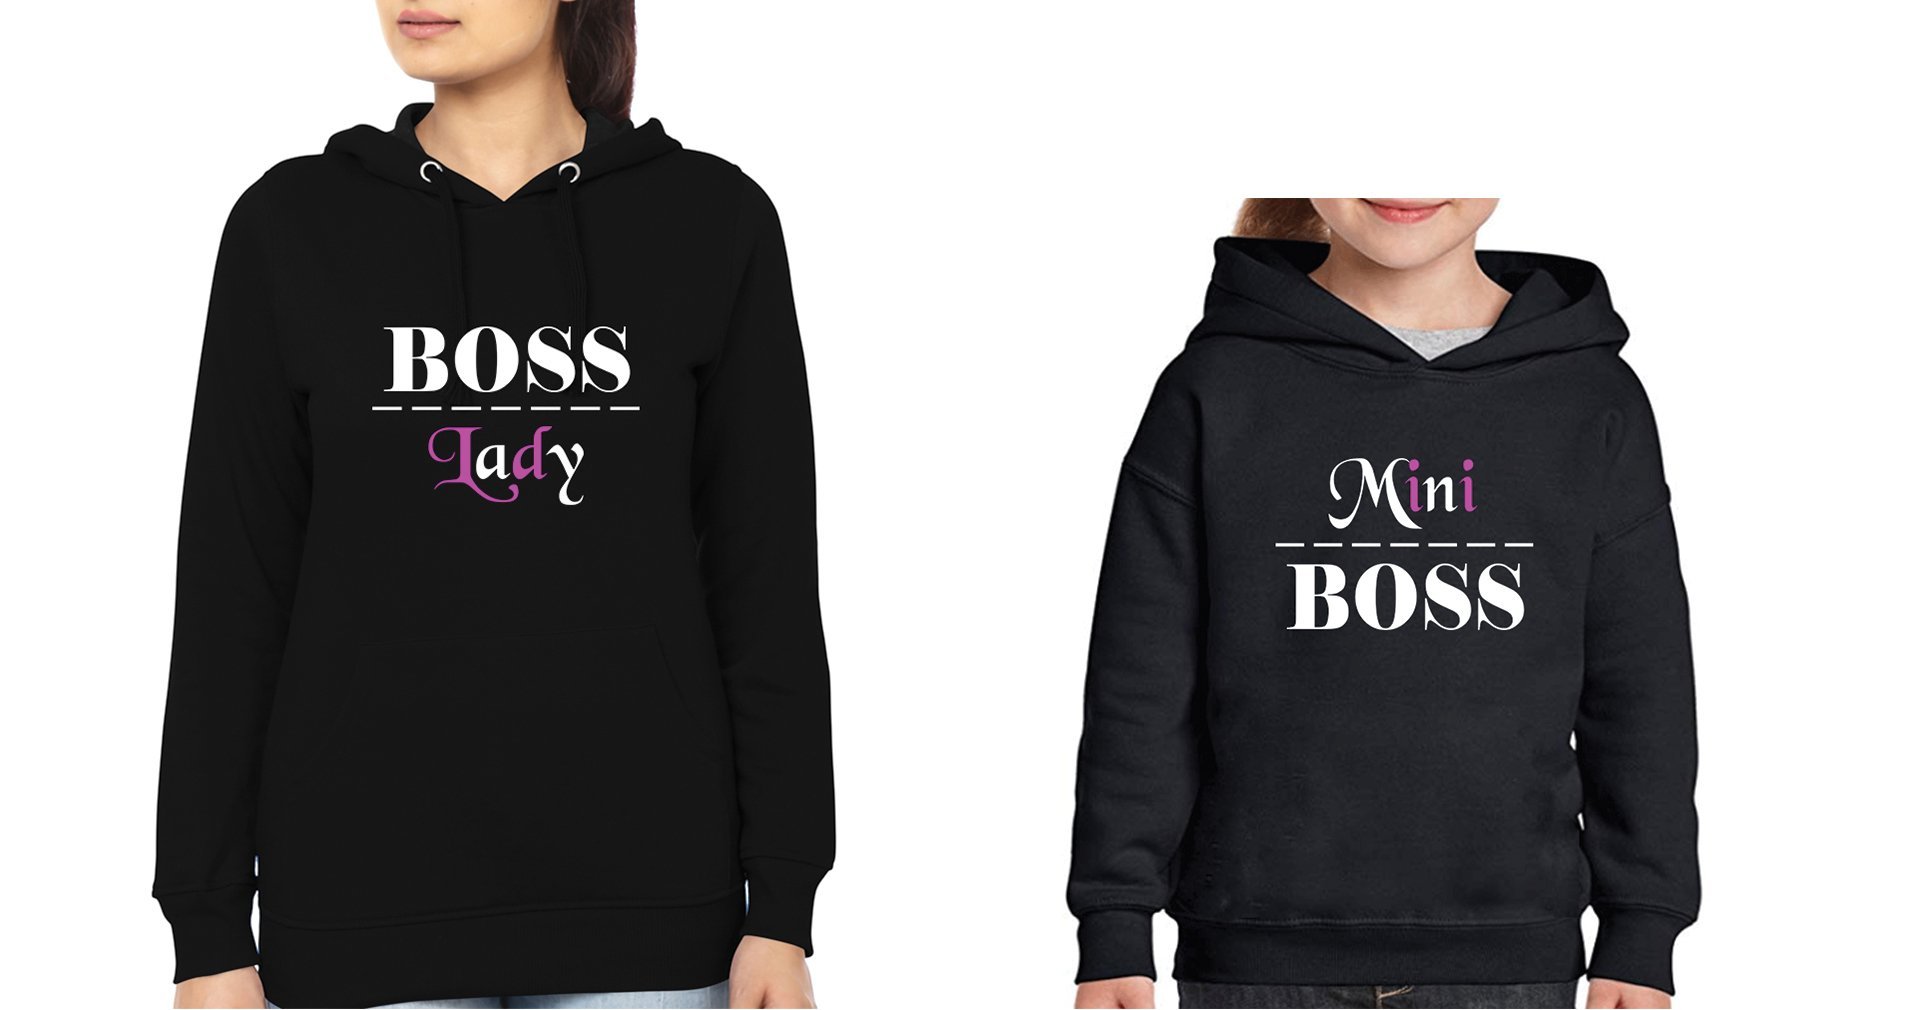 Boss Lady & Mini Boss Mother and Daughter Matching Hoodies- FunkyTradition - FunkyTradition